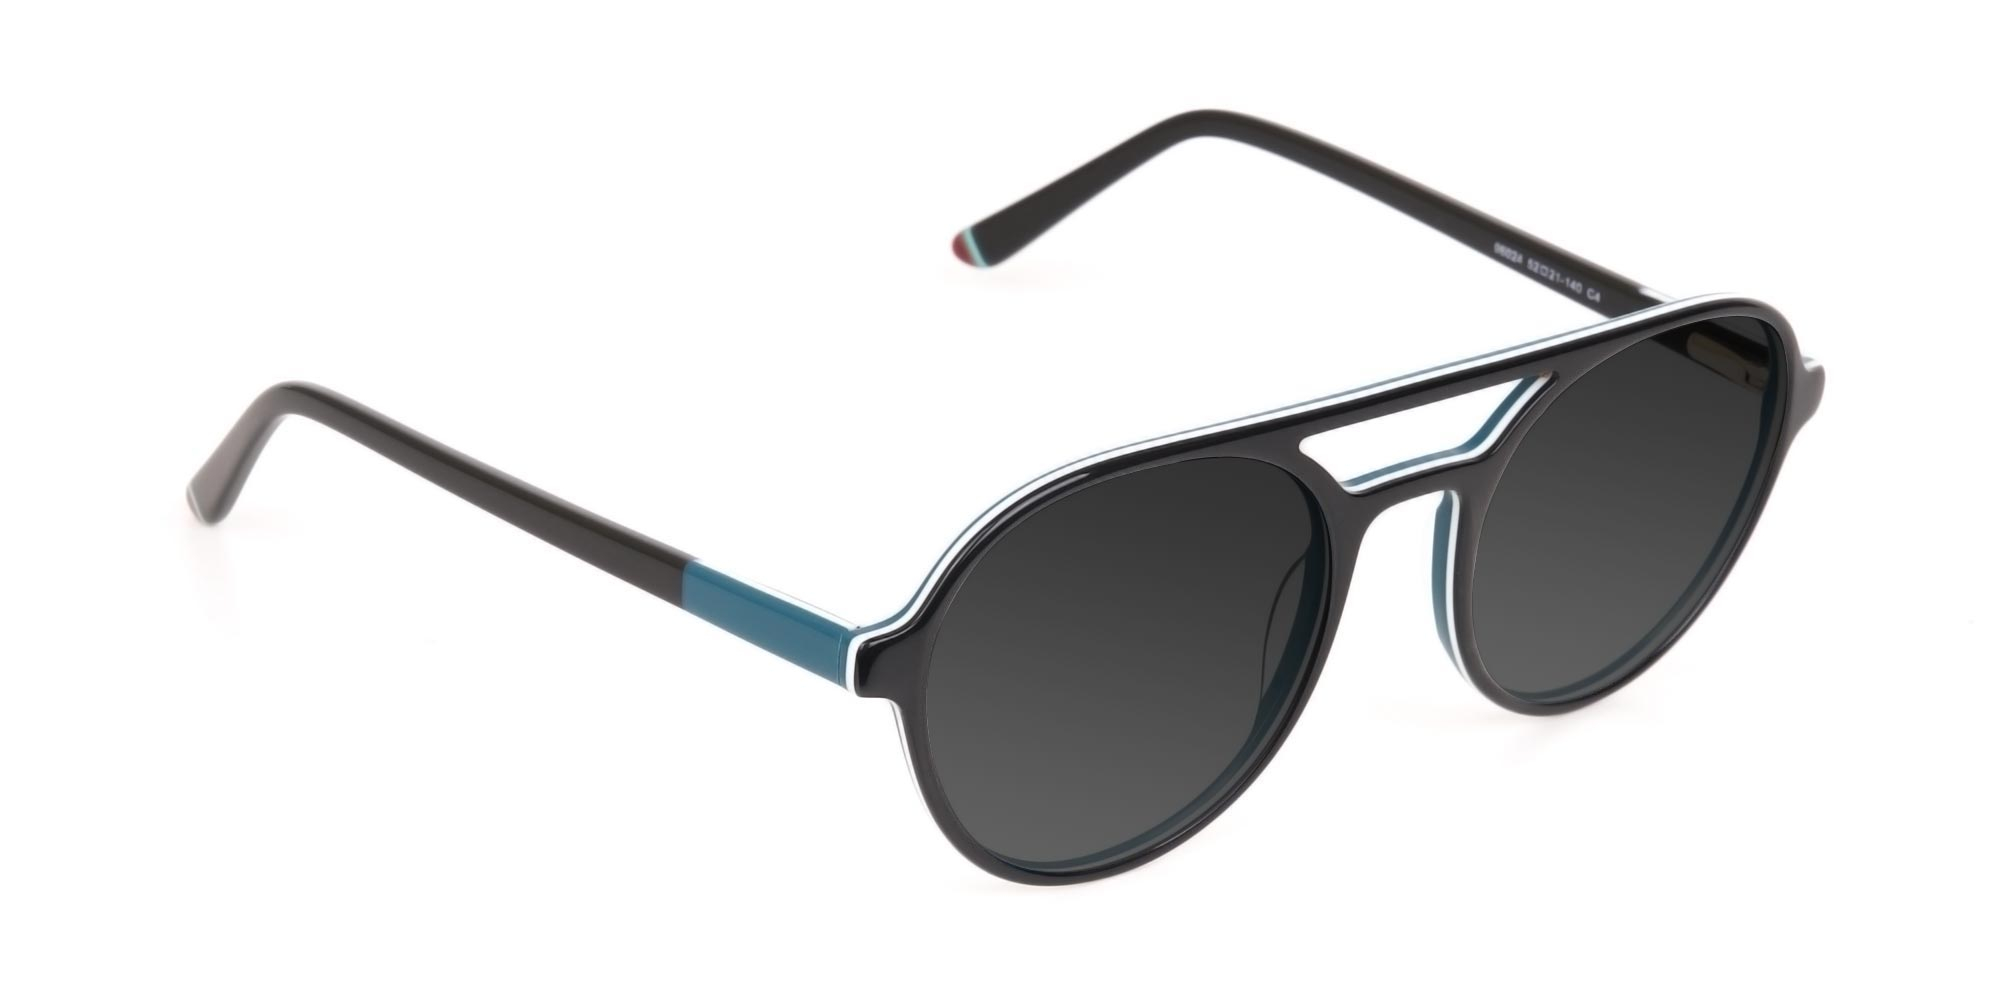 Black and Turquoise Sunglasses - 1